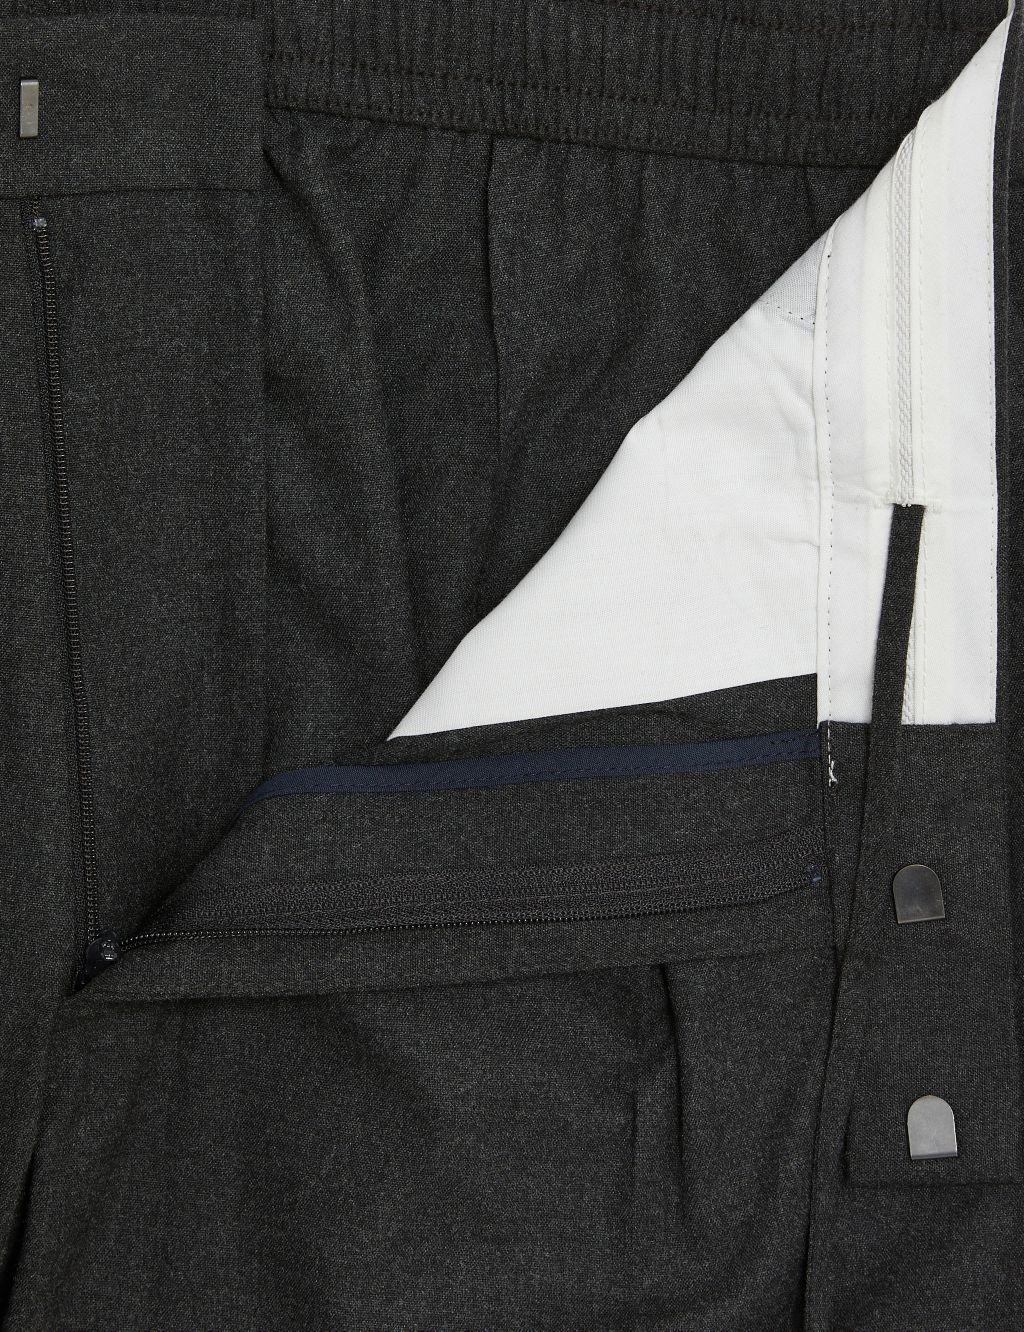 Single Pleat Brushed Stretch Trouser image 6